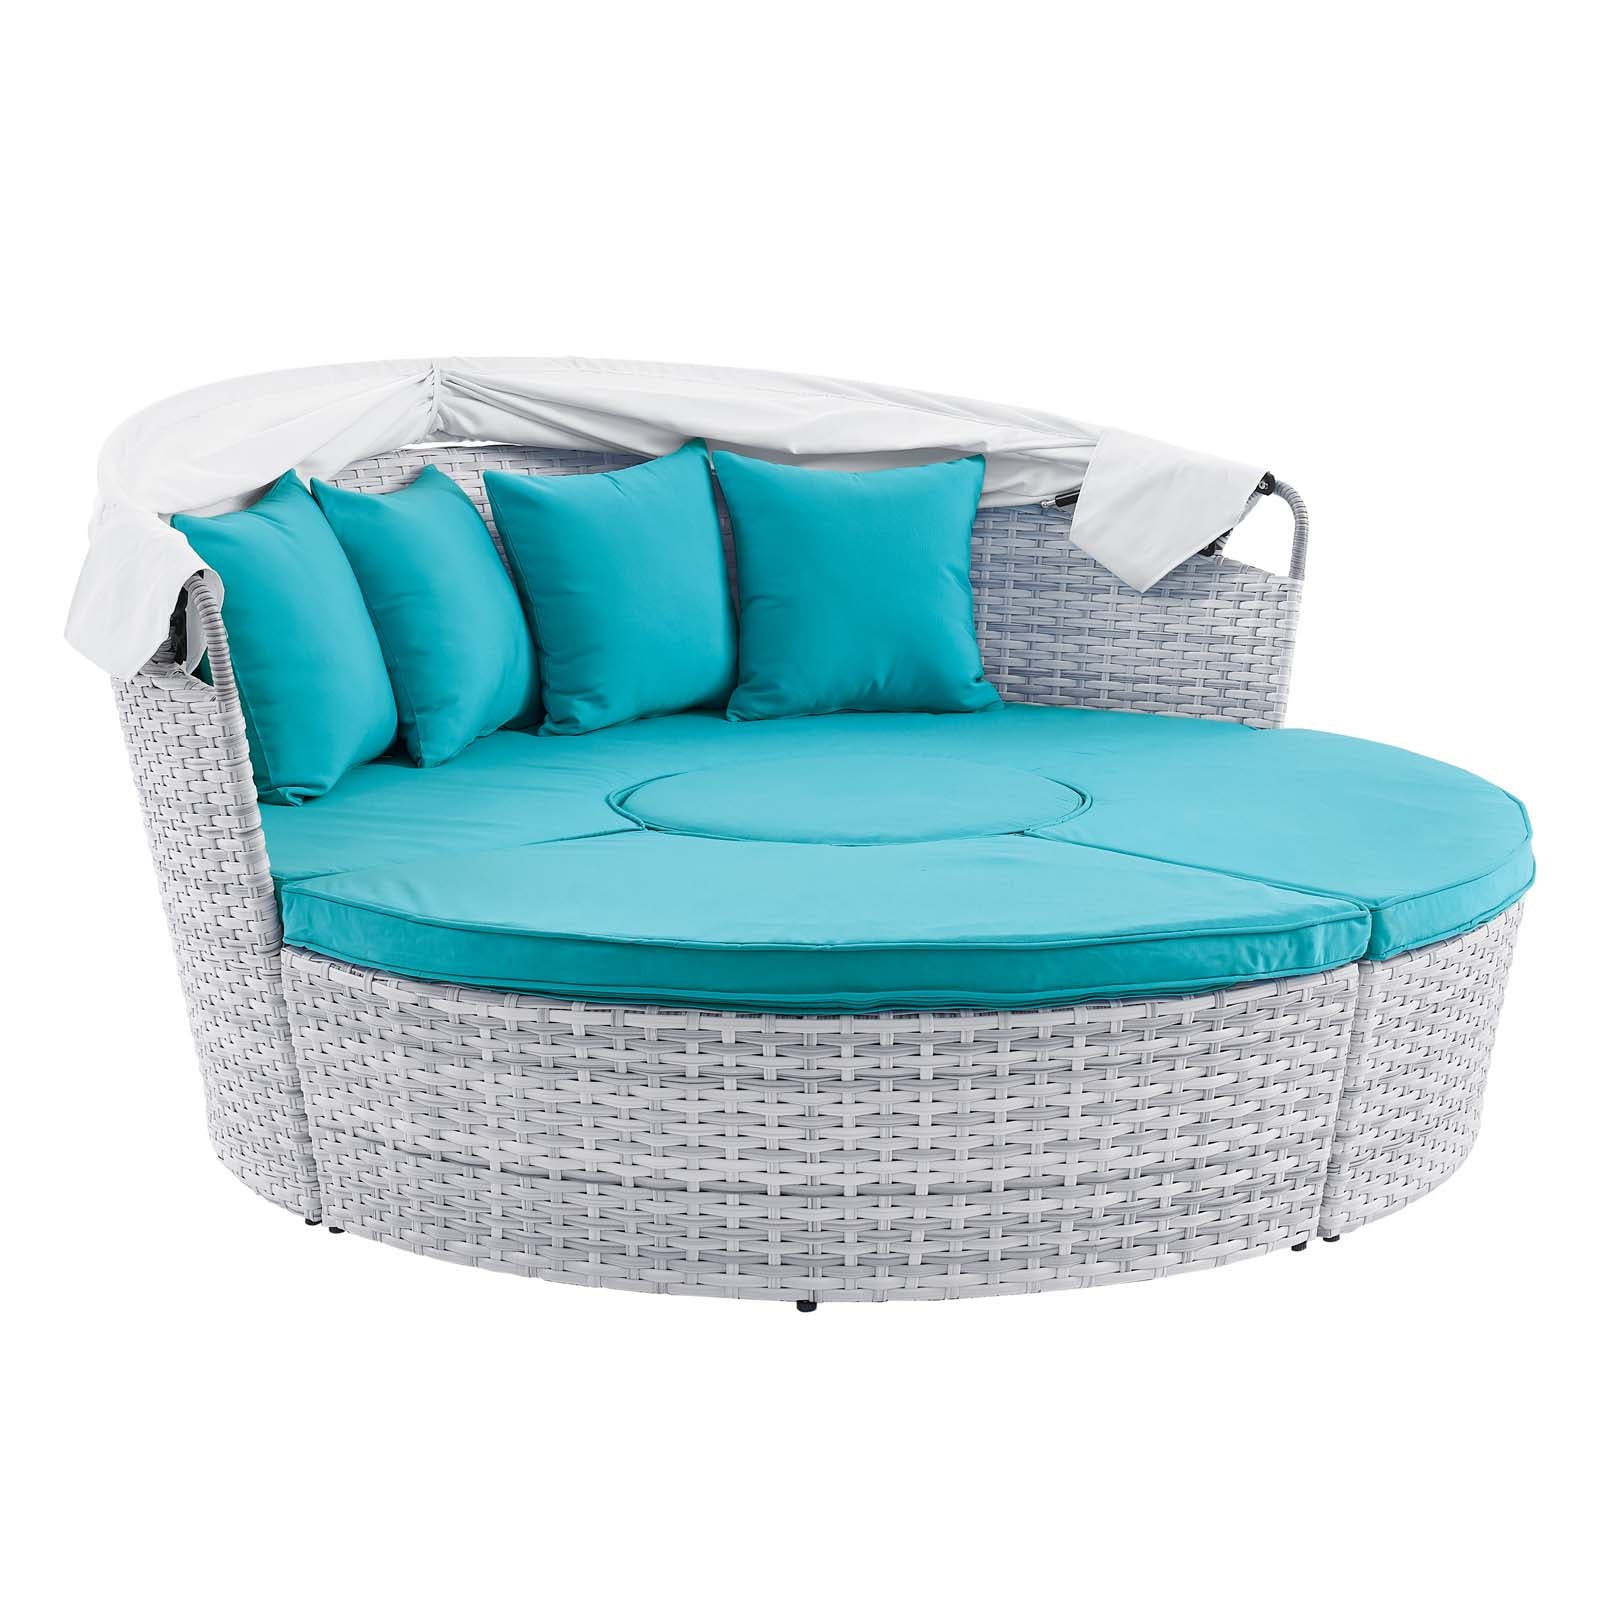 Modway Patio Daybeds - Scottsdale Canopy Sunbrella Outdoor Patio Daybed Light Gray Aruba